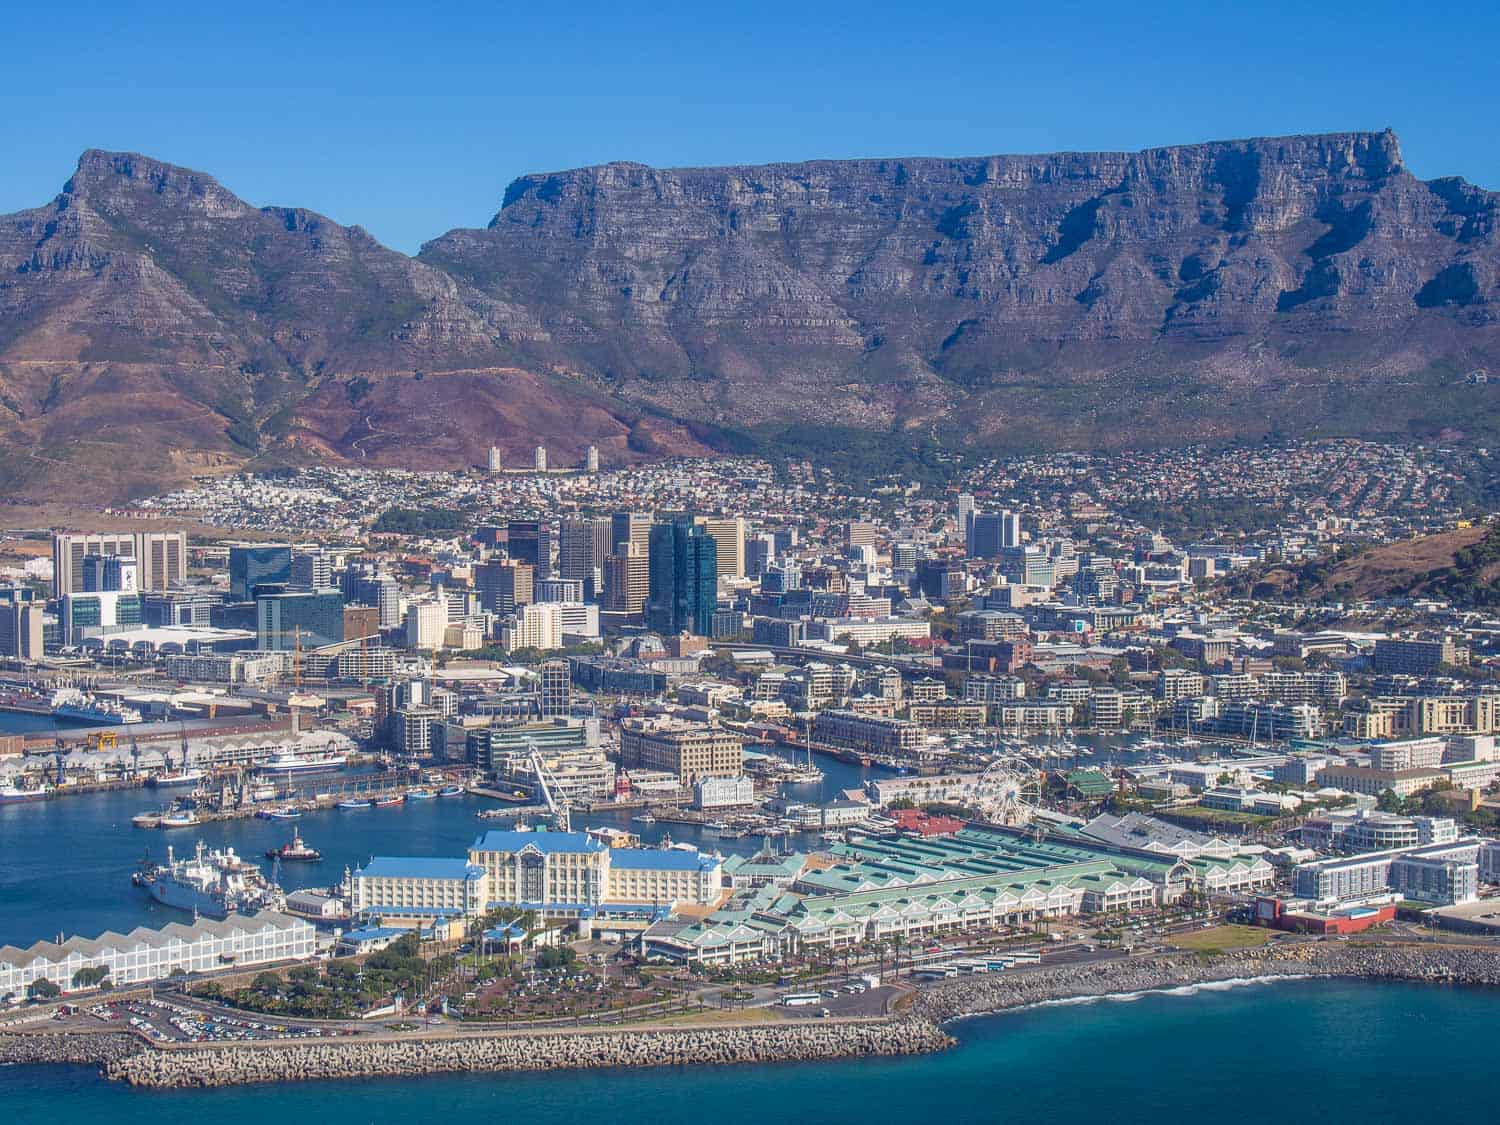 Cape Town Helicopters review: the waterfront